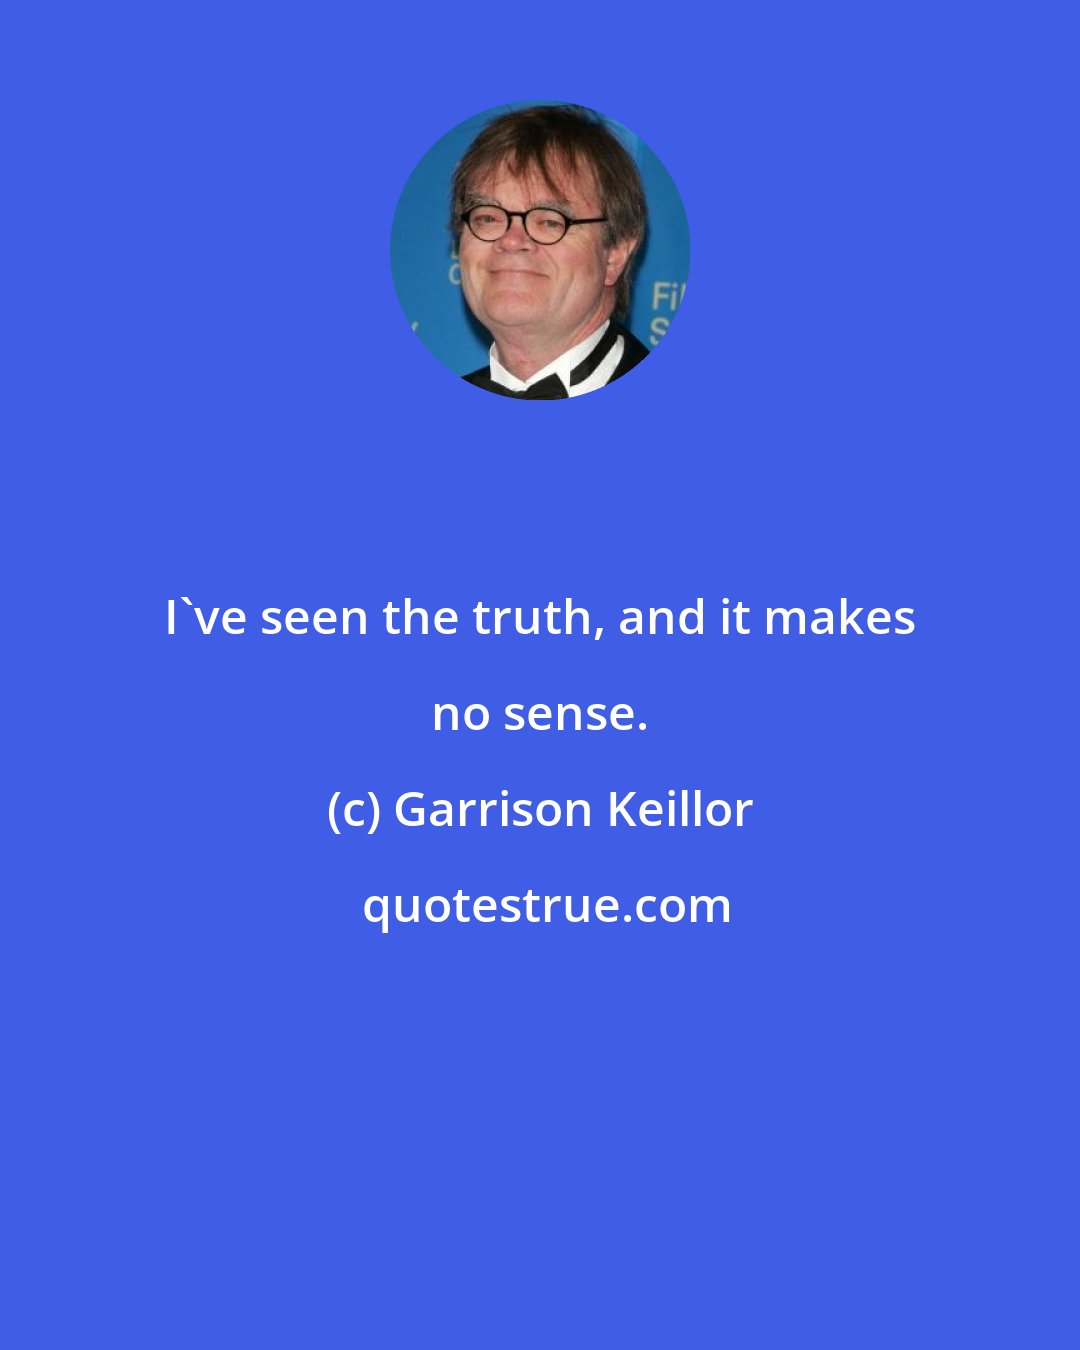 Garrison Keillor: I've seen the truth, and it makes no sense.